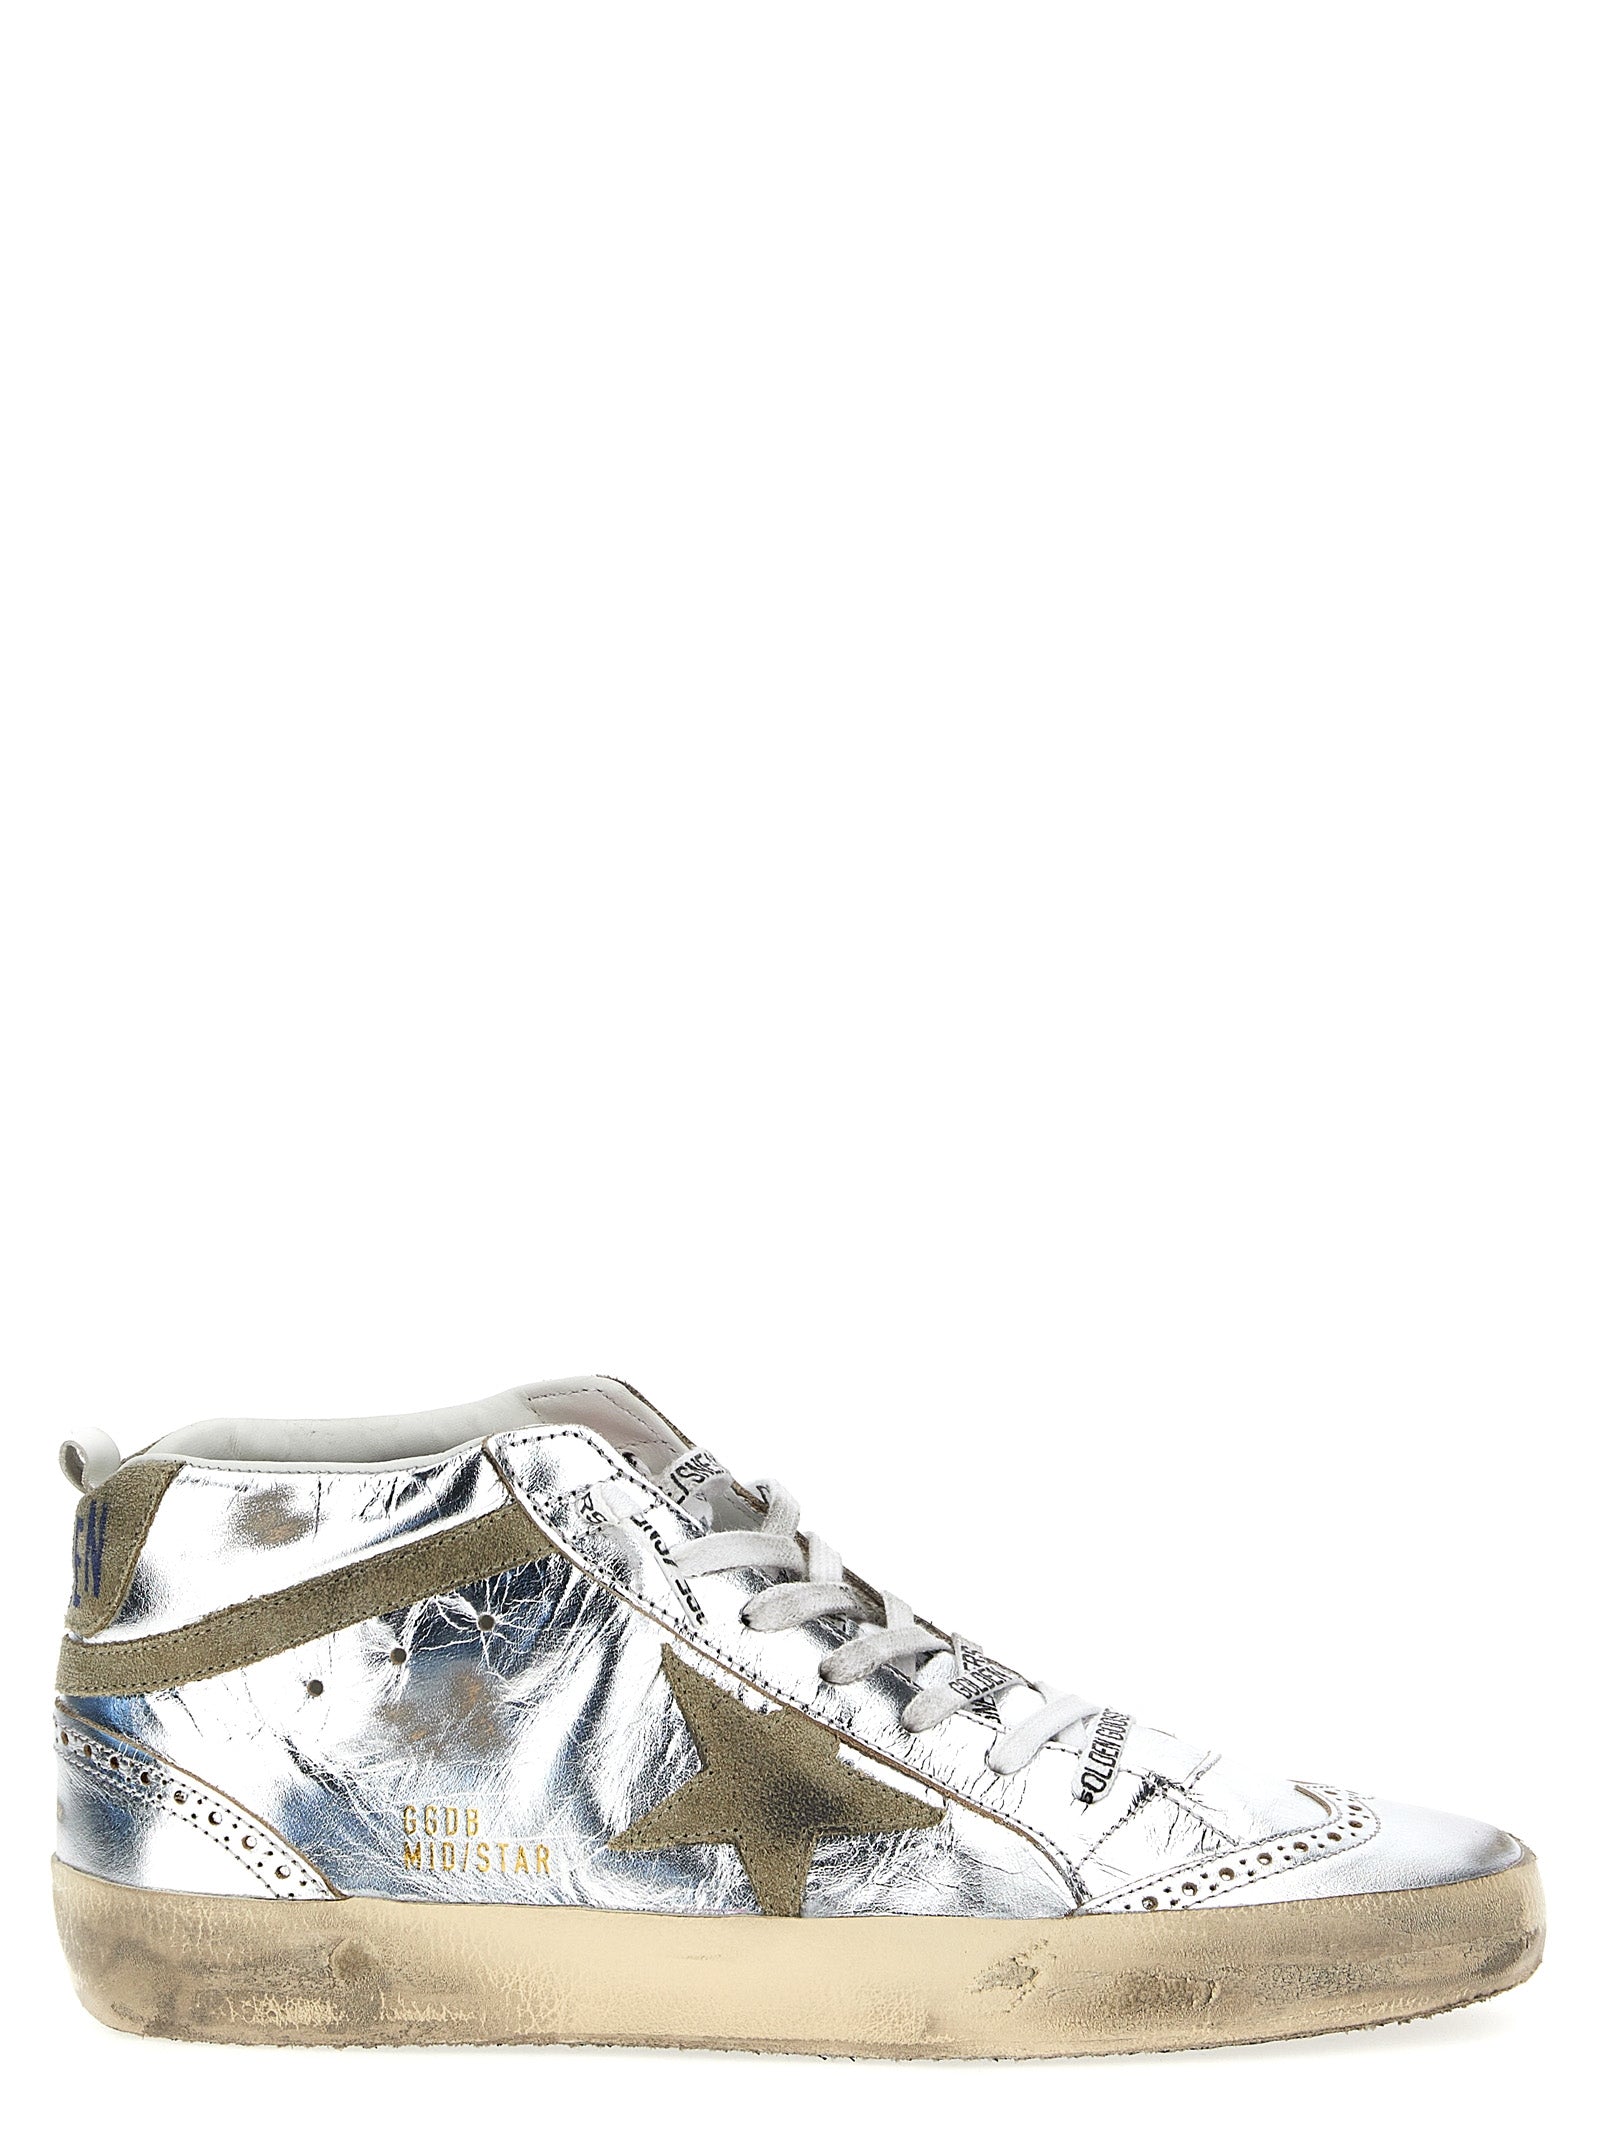 Shop Golden Goose Mid Star Sneakers Silver